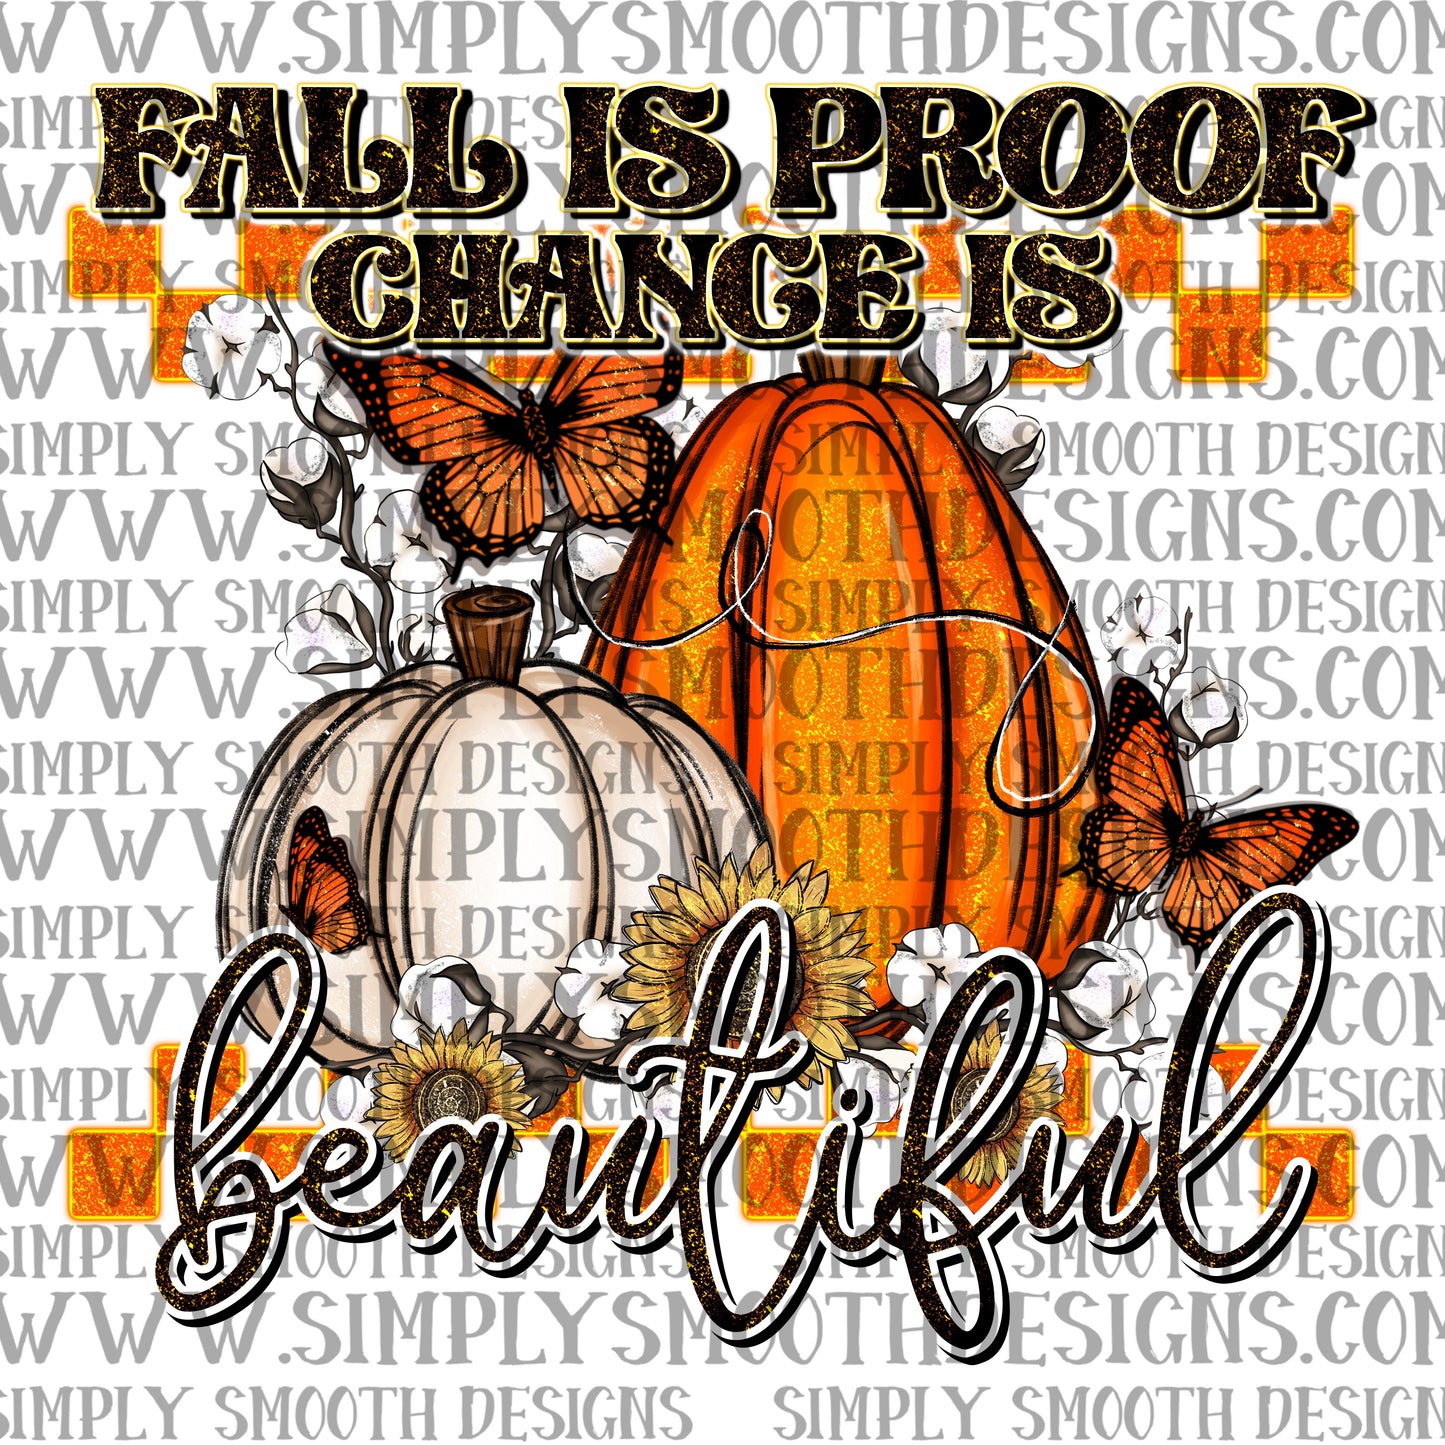 Fall is proof